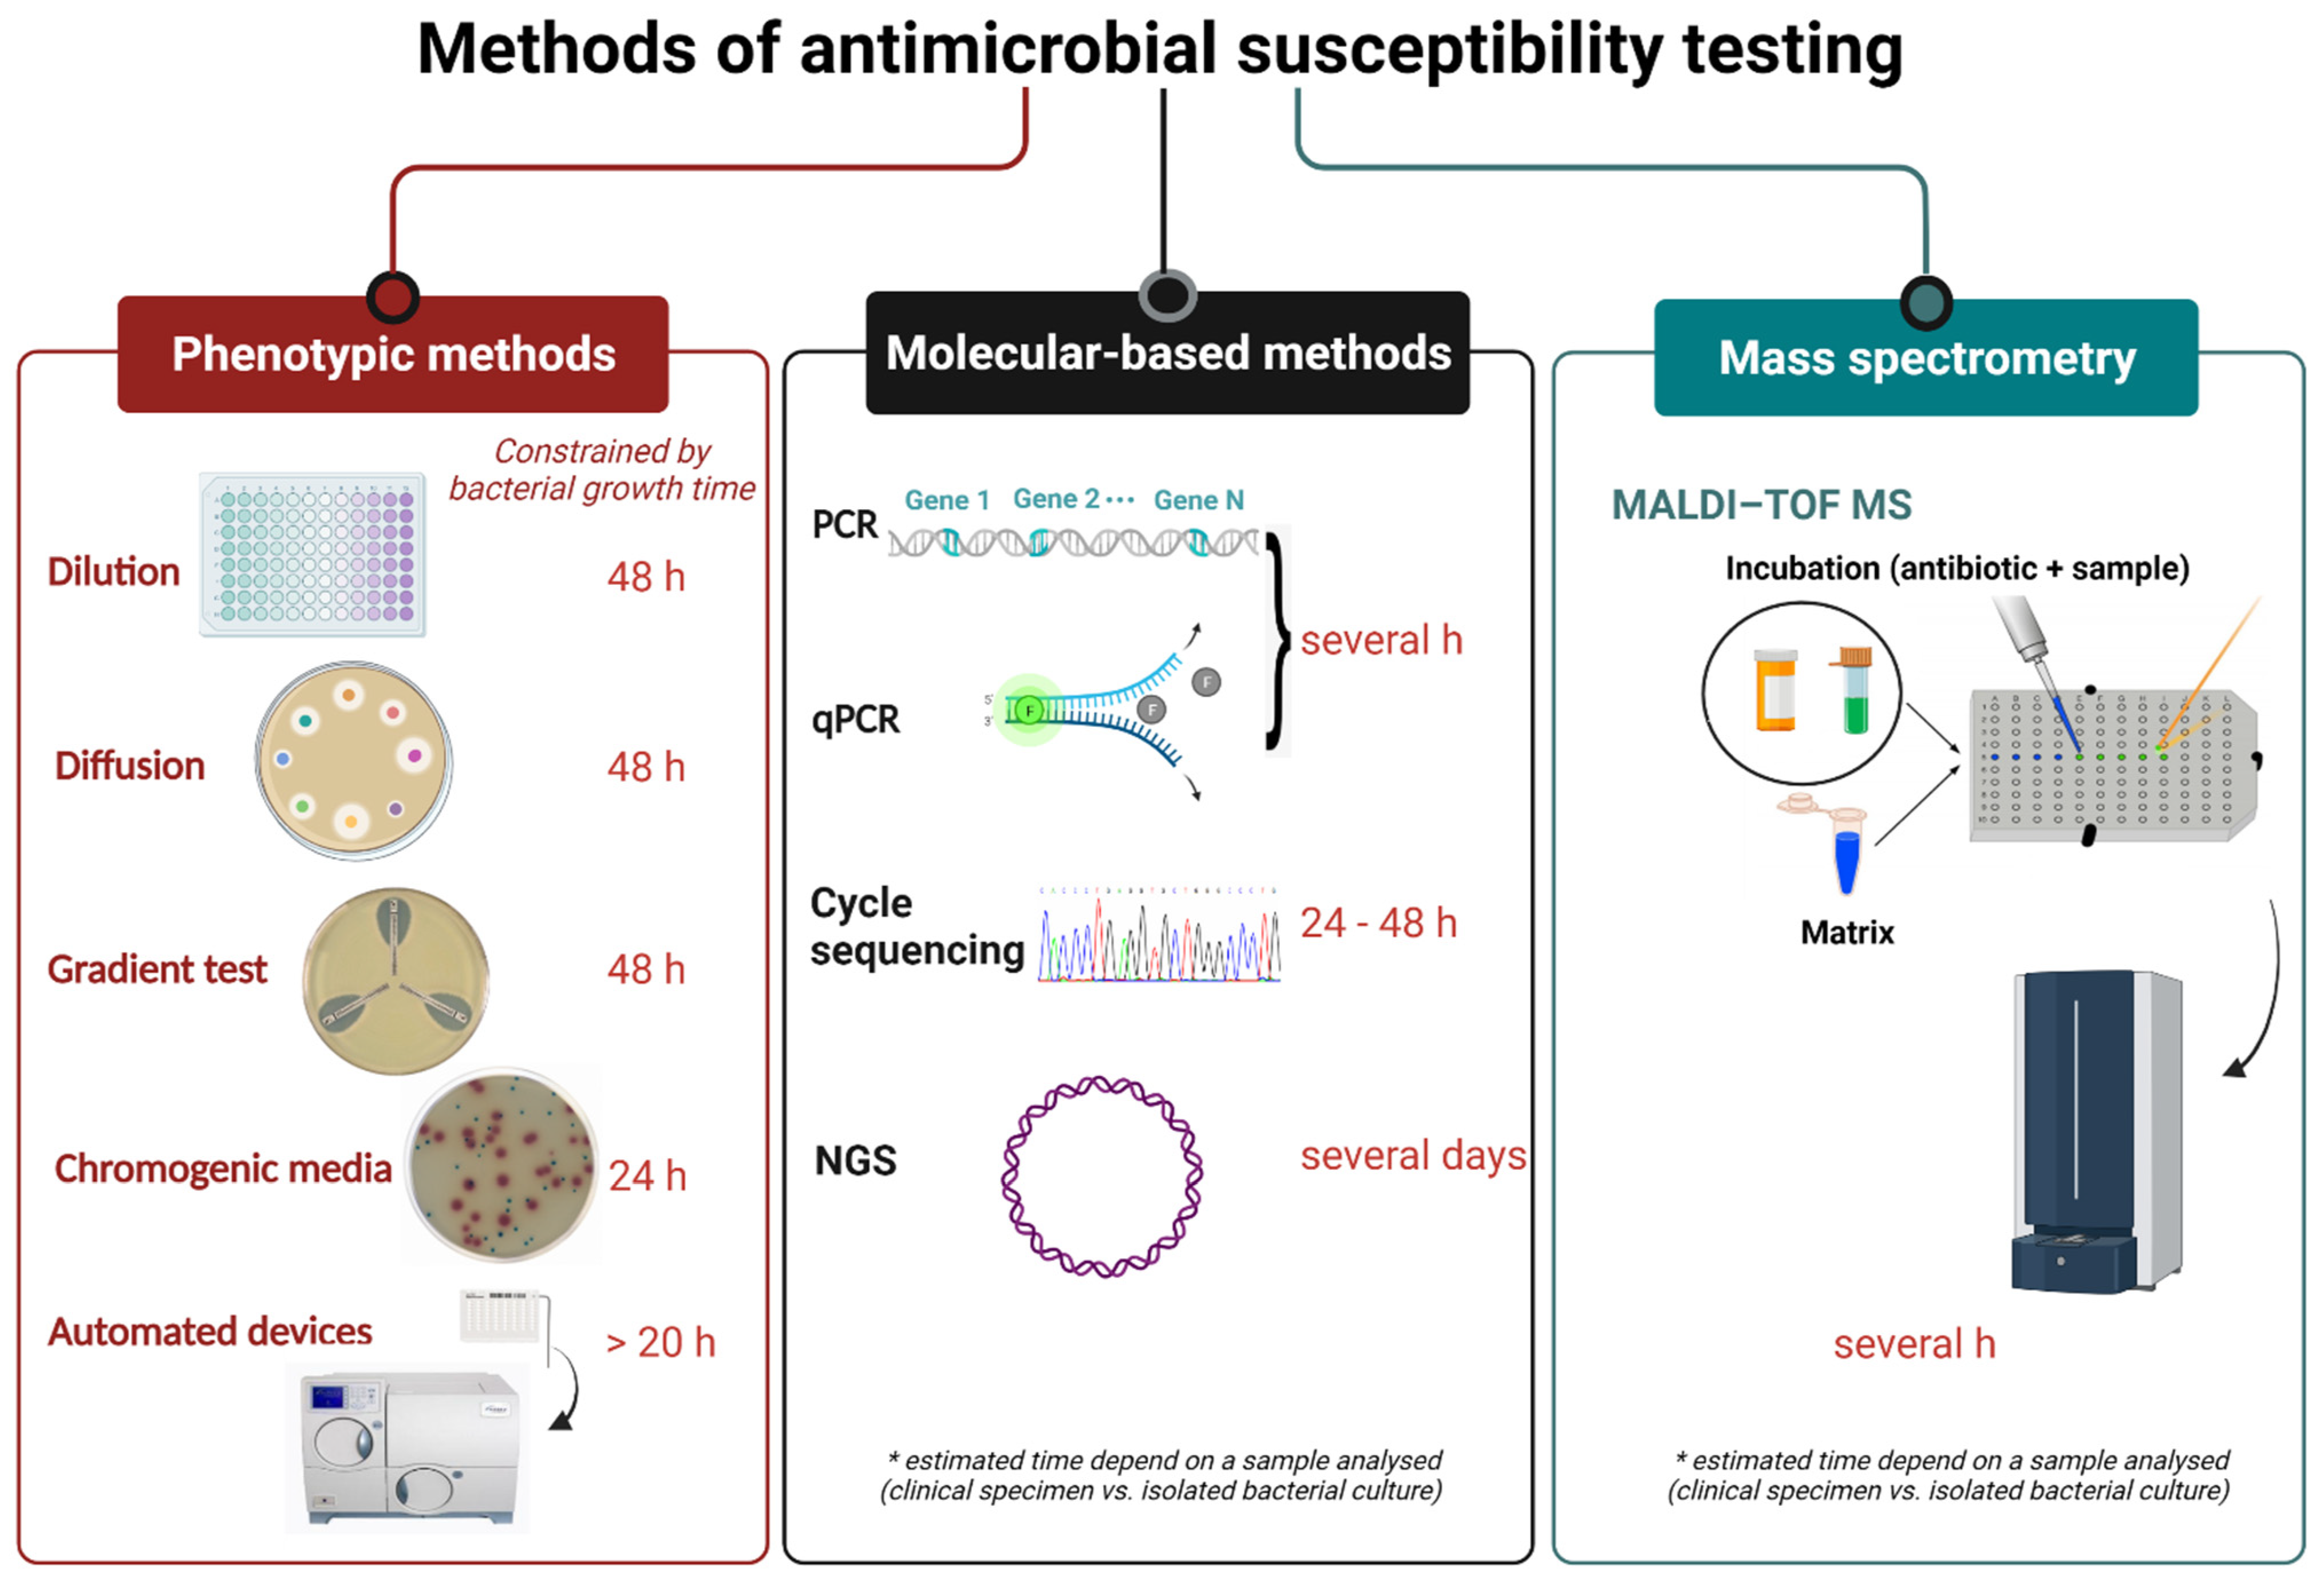 Susceptibility to antimicrobial agents